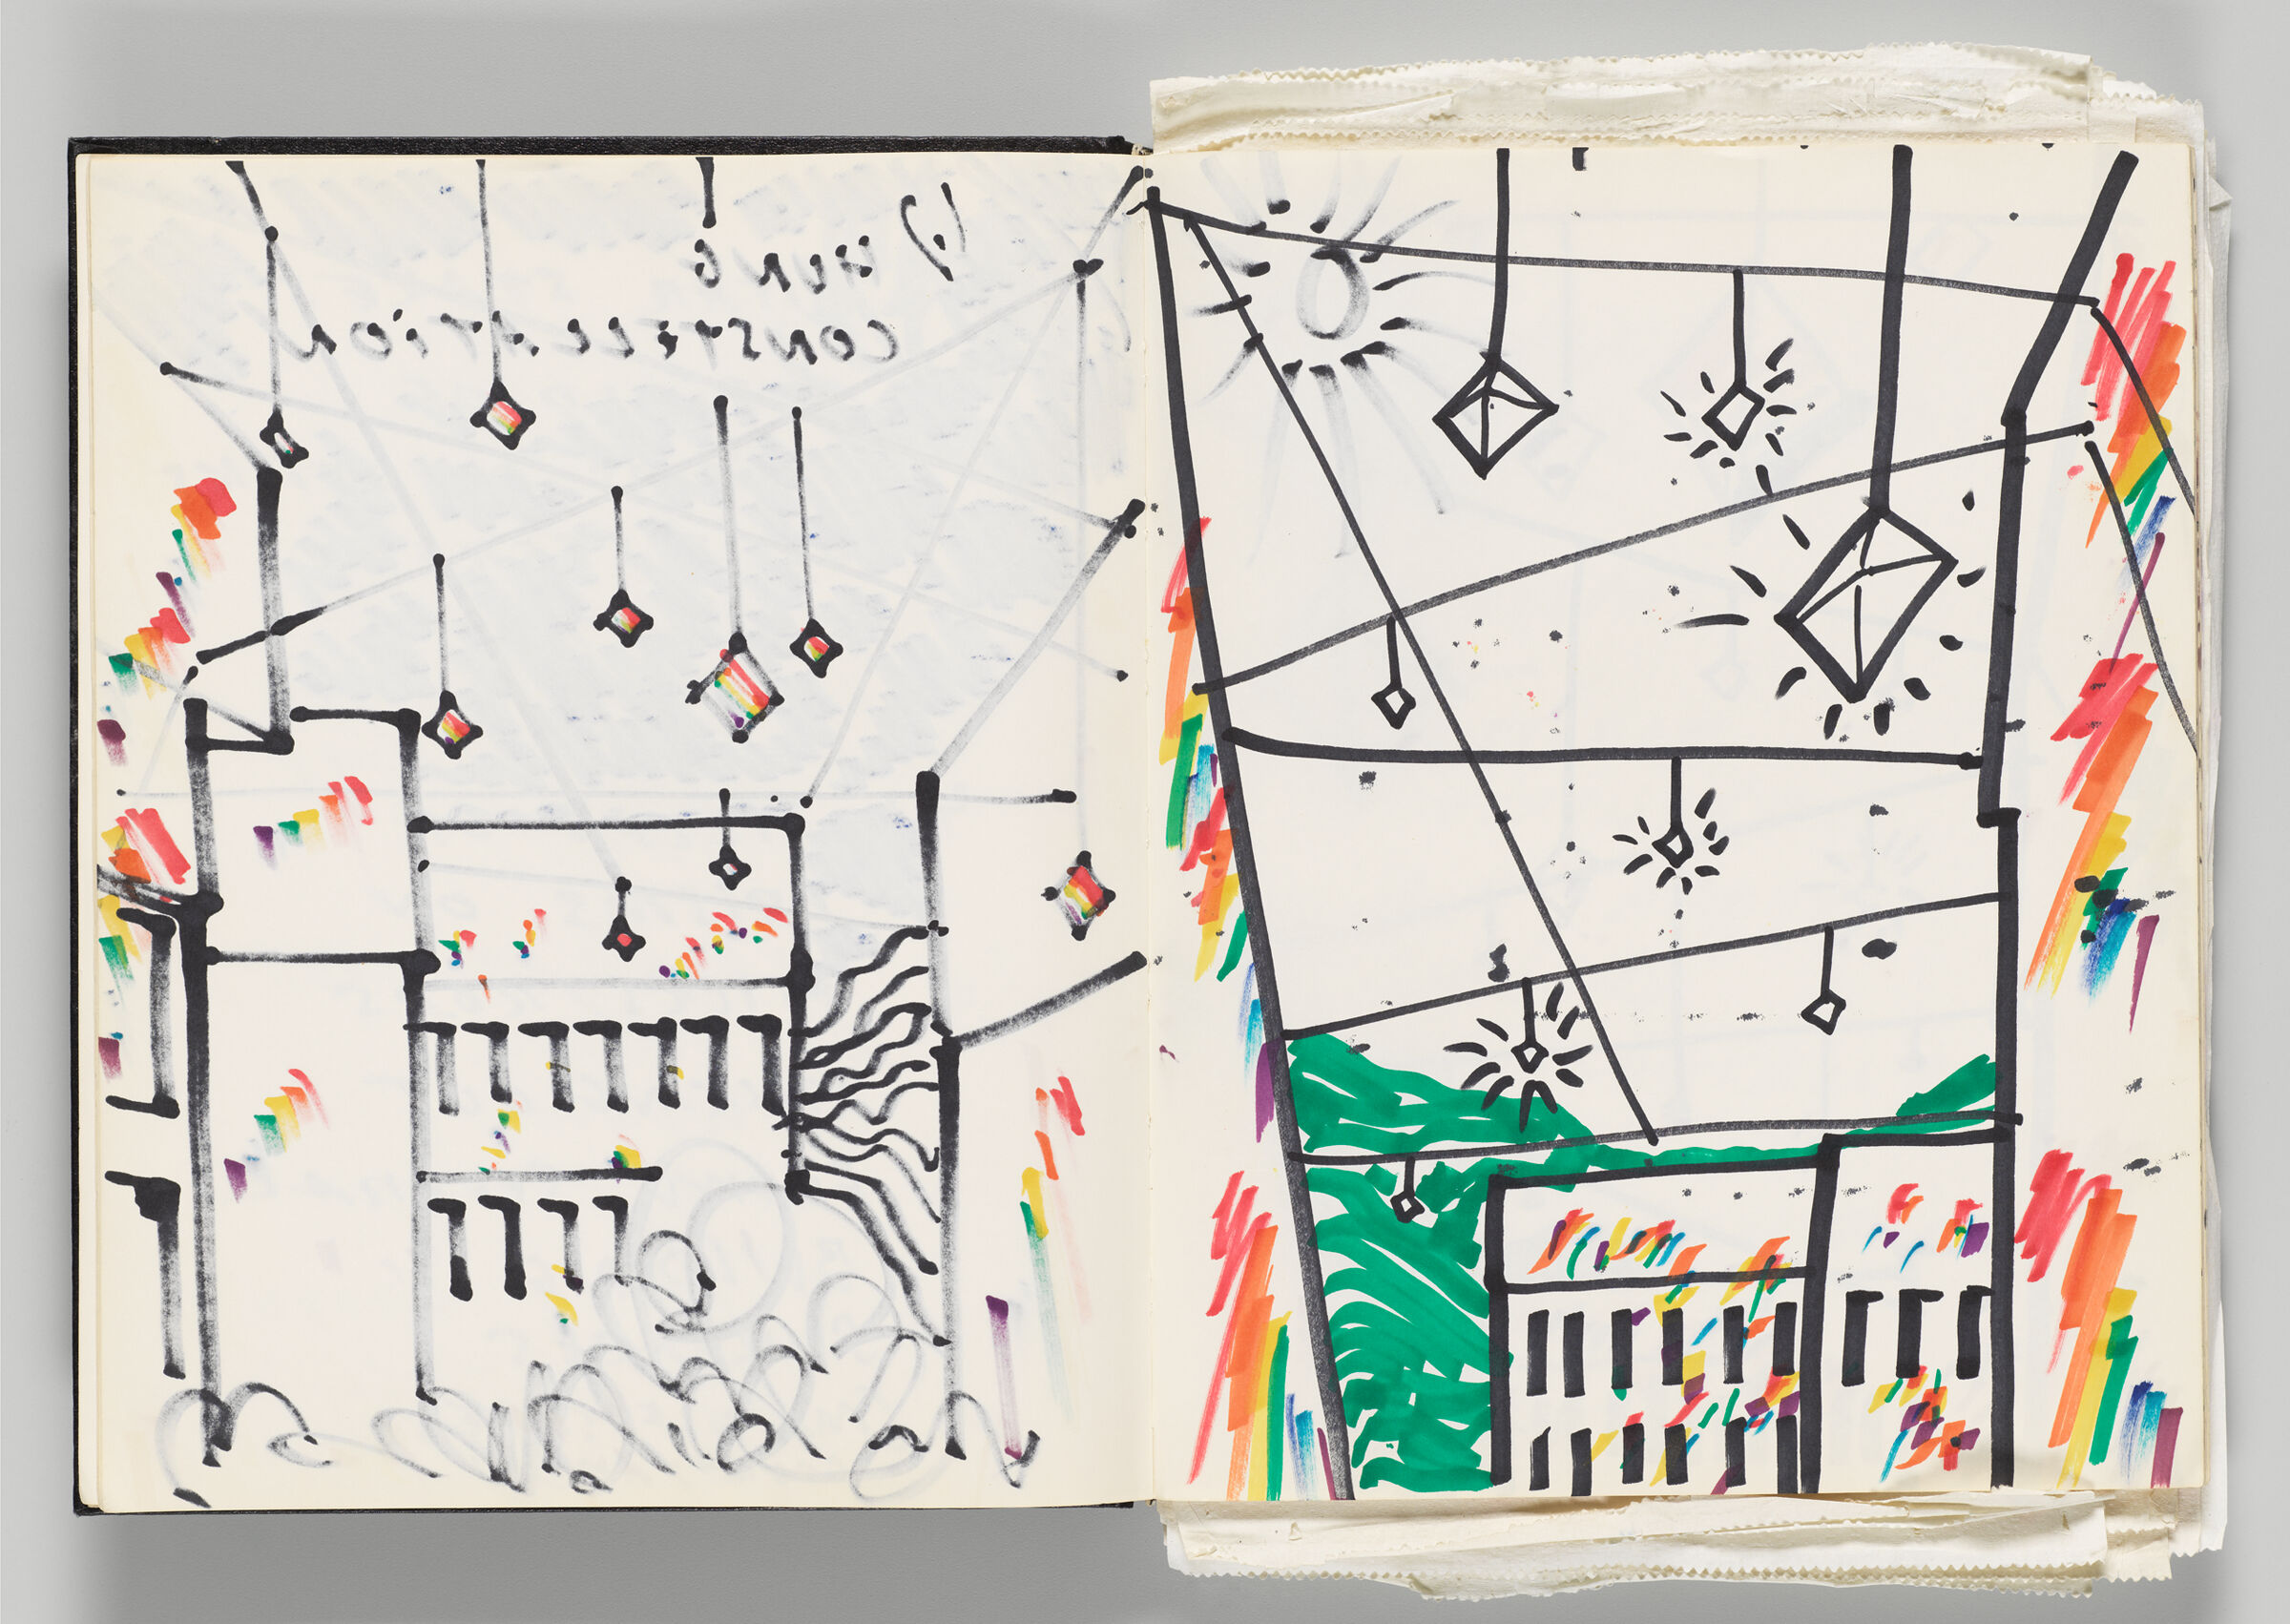 Untitled (Bleed-Through Of Previous Page, Left Page); Untitled (Hanging Prisms, Right Page)